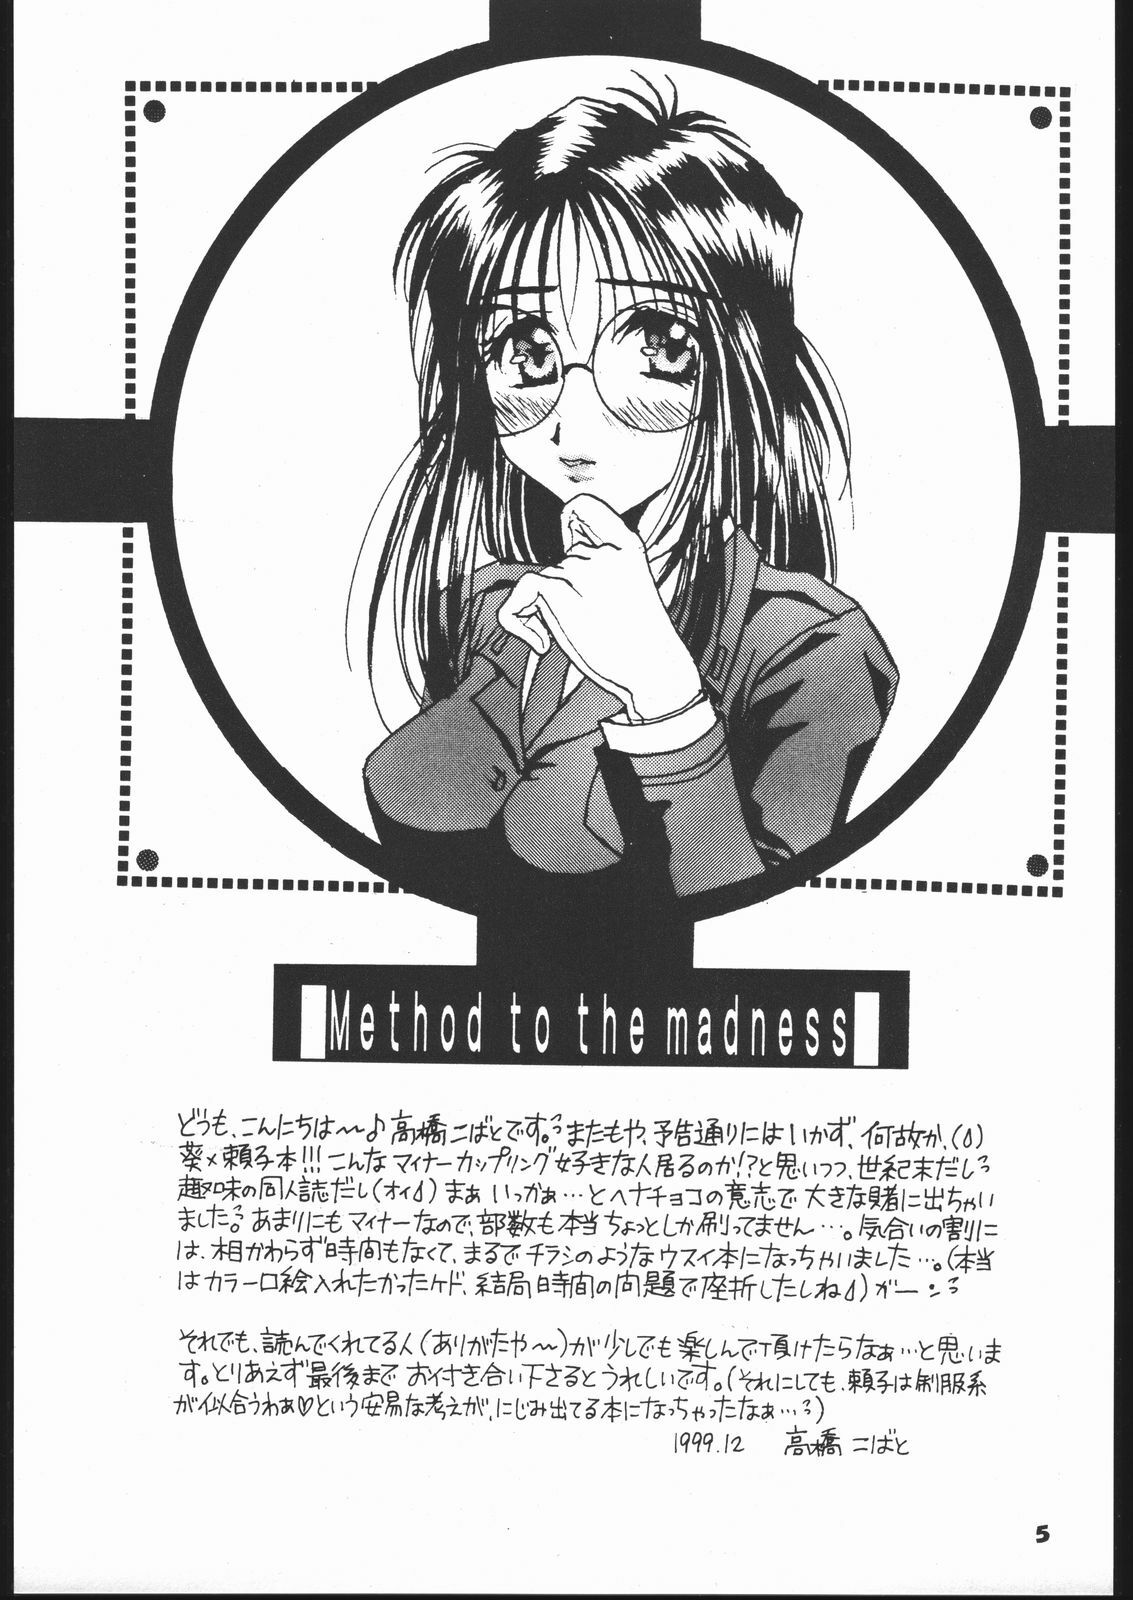 (C57) [Mechanical Code (Takahashi Kobato)] Method to the madness (You're Under Arrest!) page 2 full